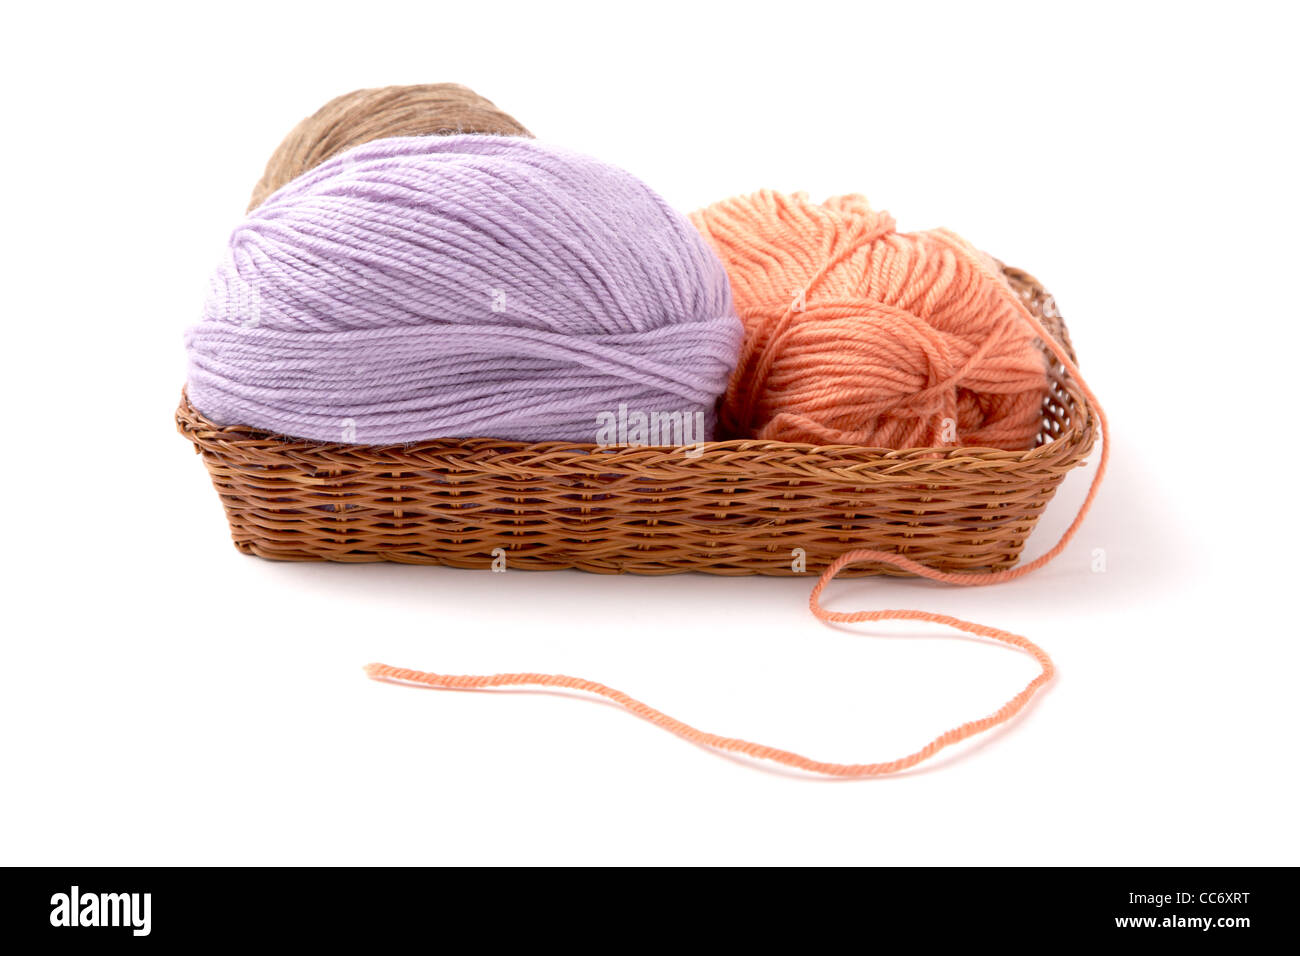 Balls of a yarn knitting in wooden box on white background Stock Photo